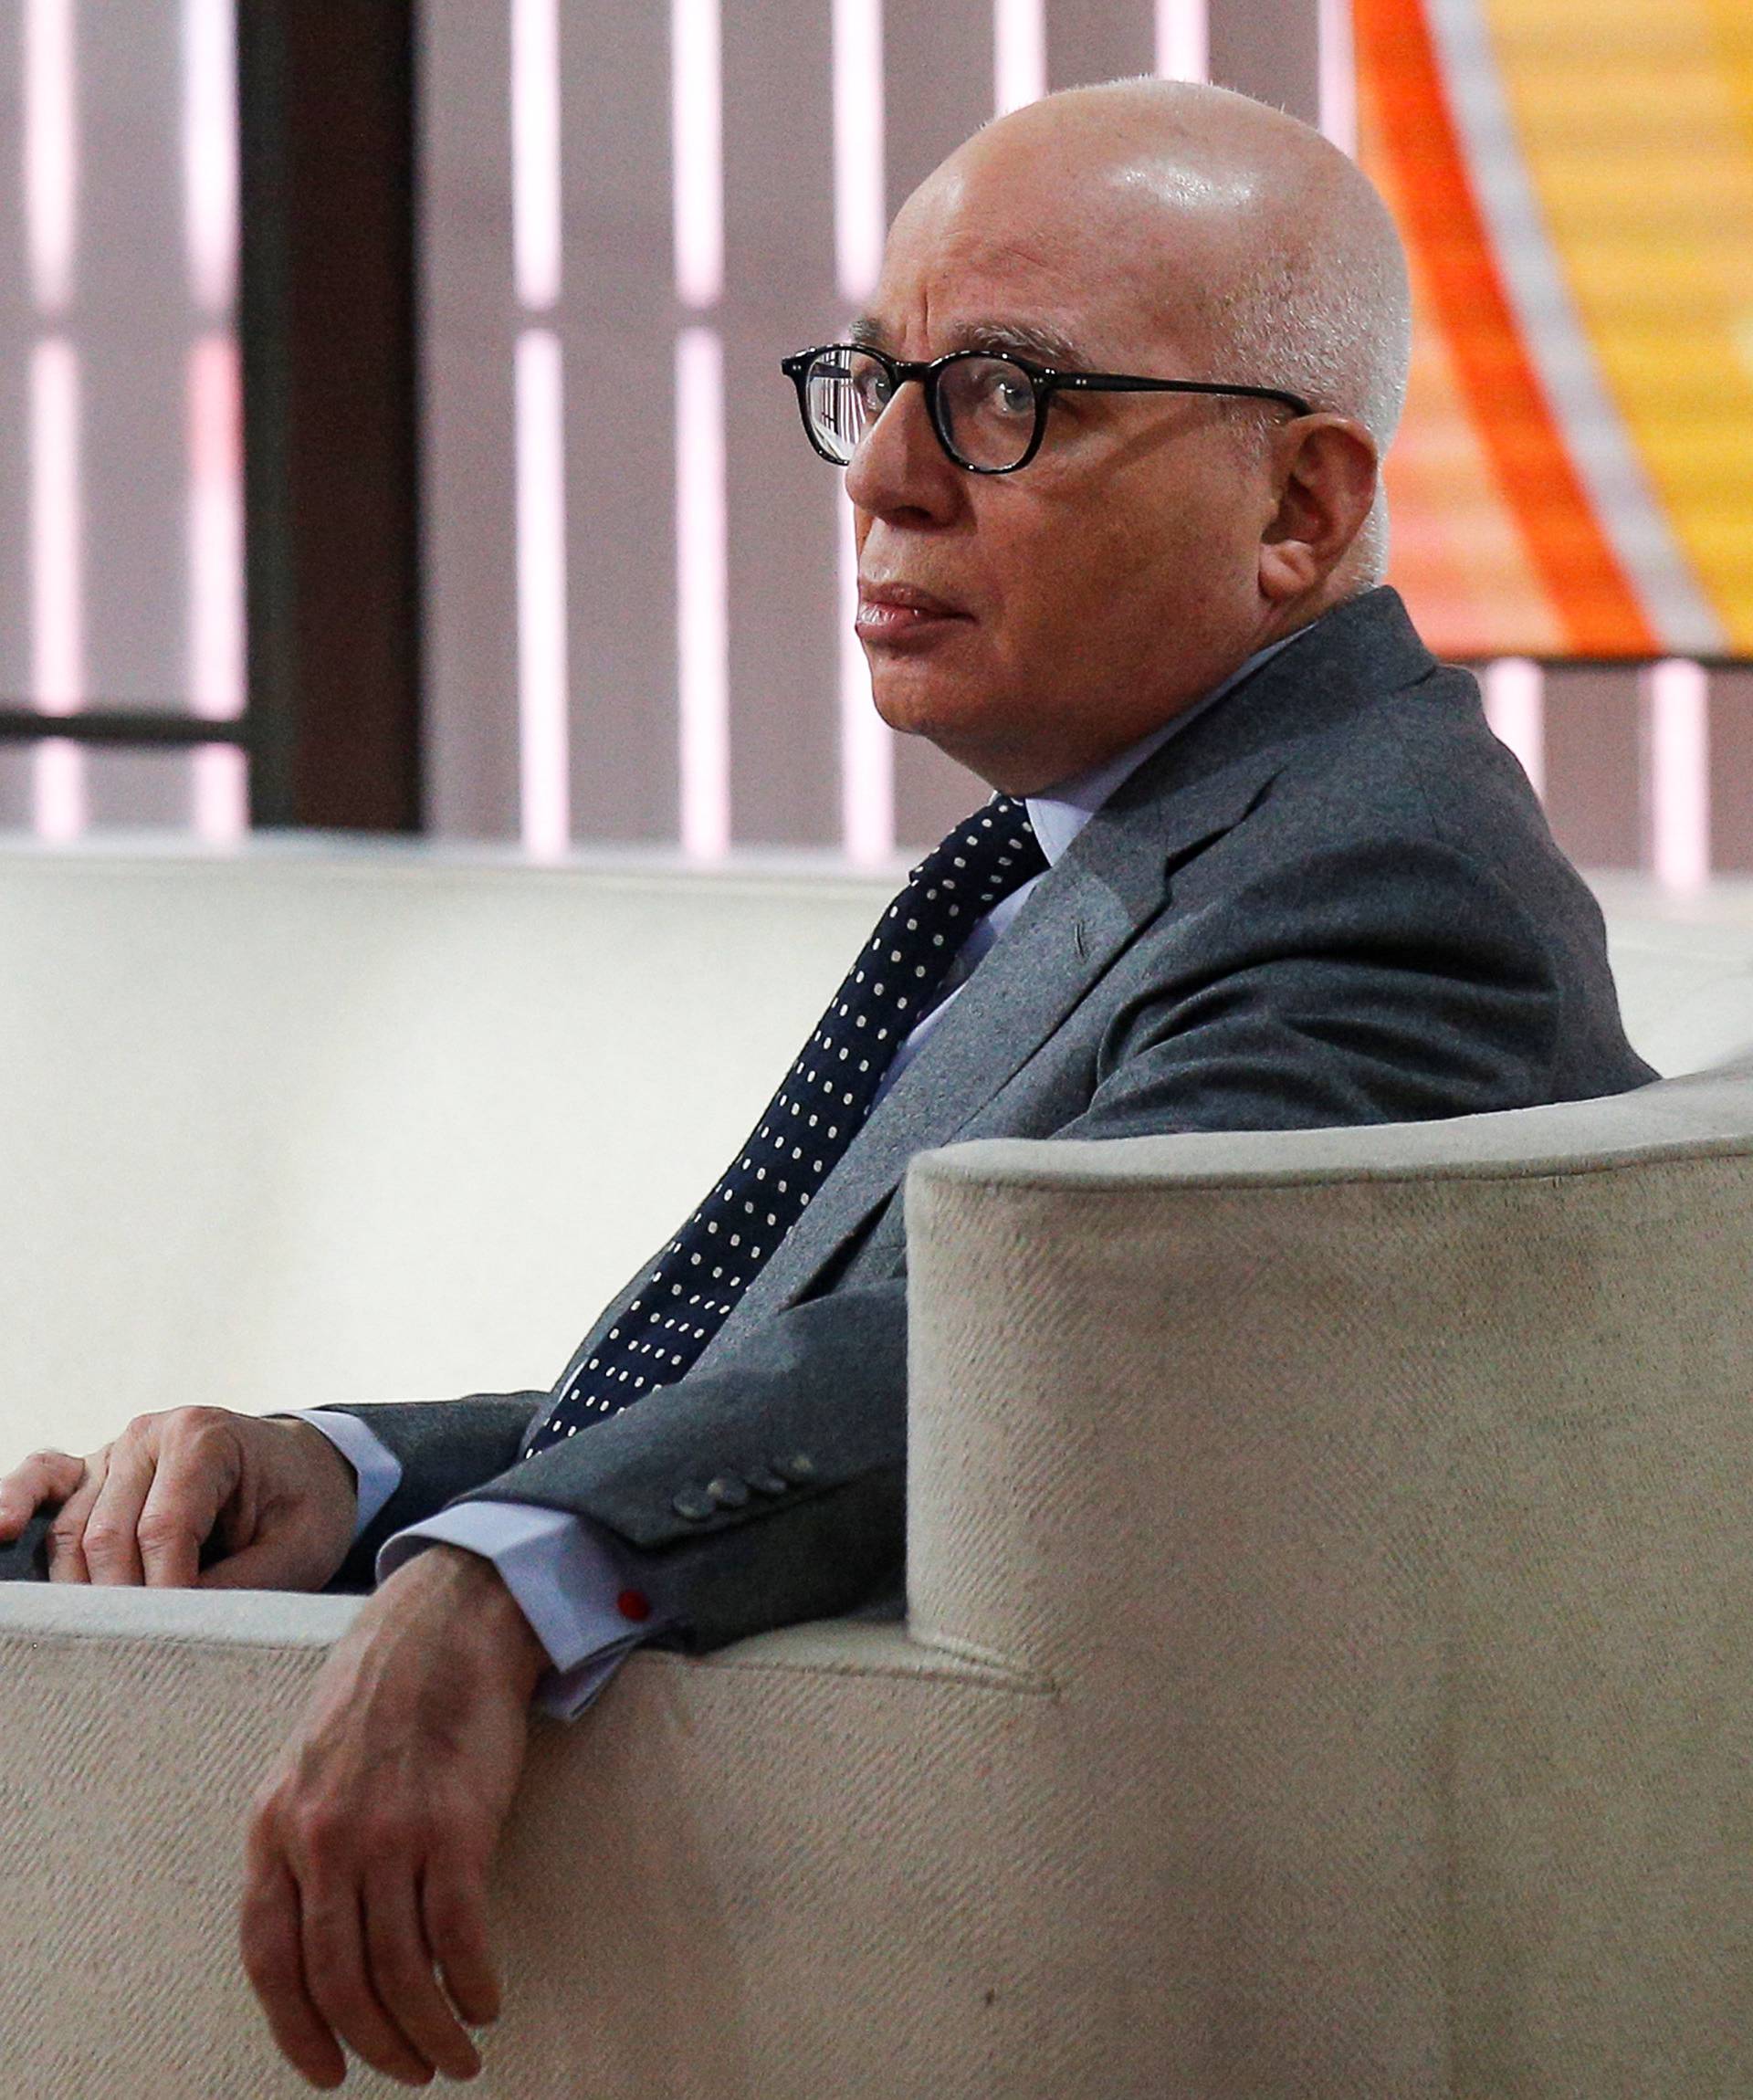 Author Michael Wolff is seen on the set of NBC's 'Today' show prior to an interview about his book "Fire and Fury: Inside the Trump White House" in New York